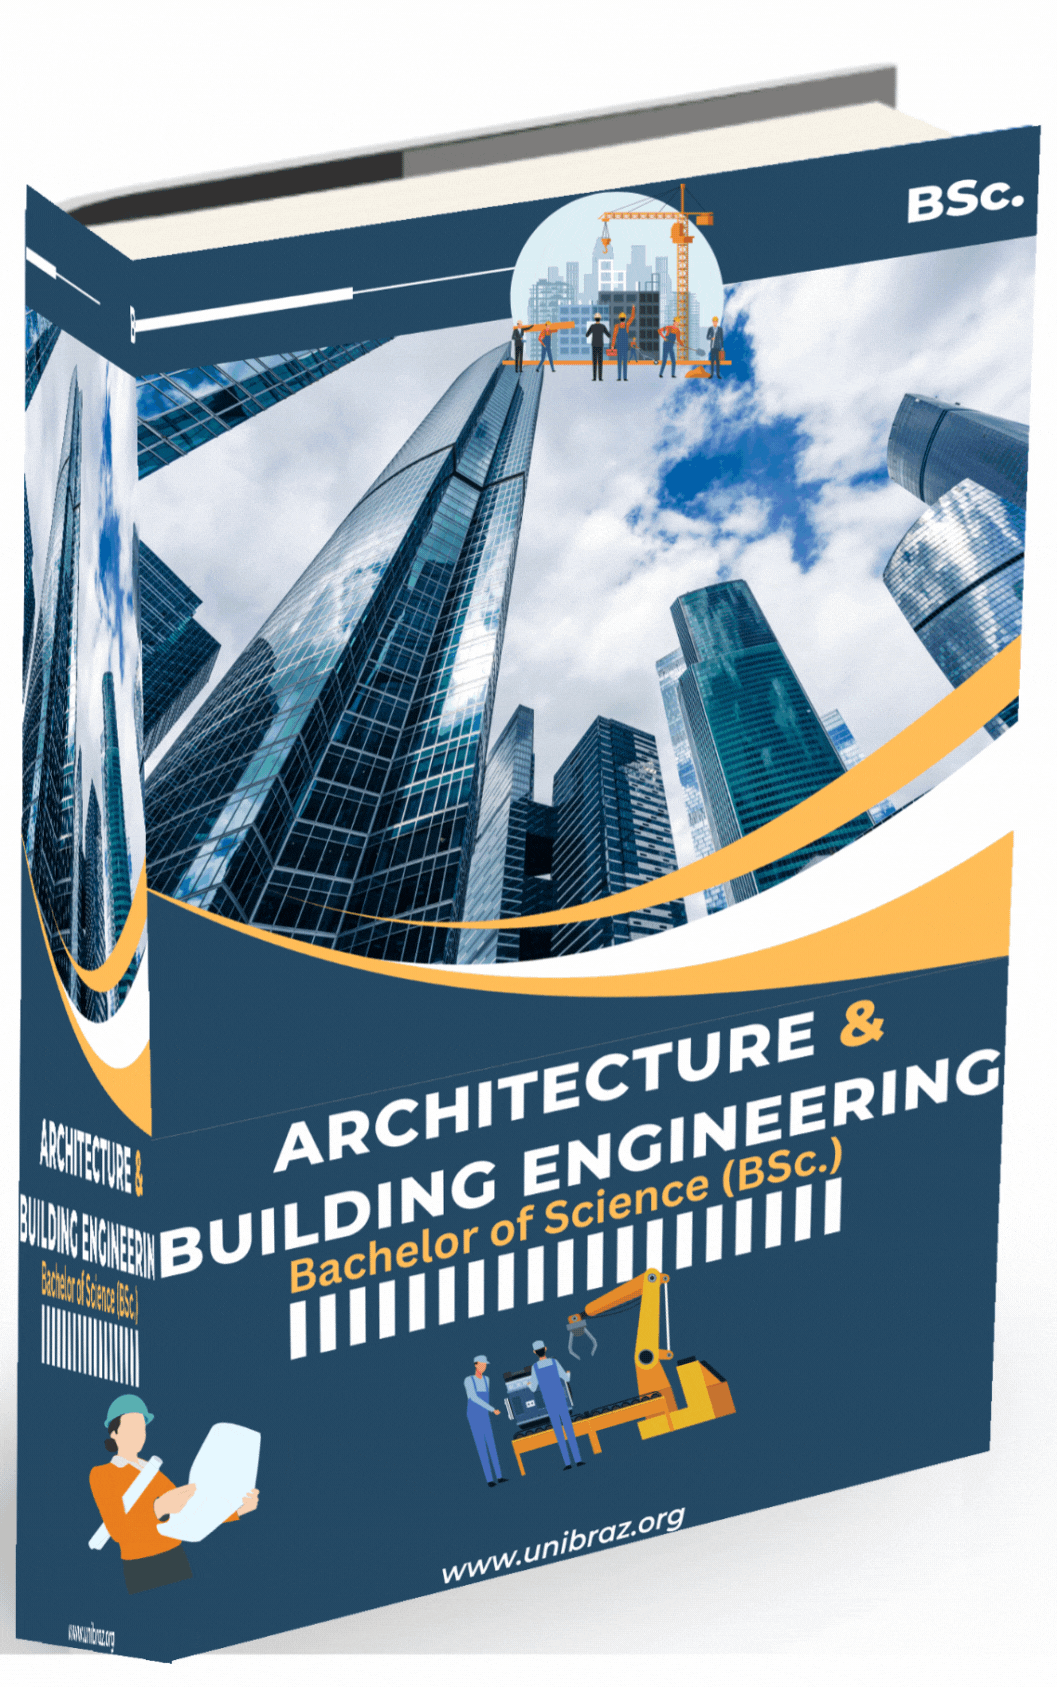 BACHELOR OF SCIENCE (BSc.) ARCHITECTURE AND BUILDING ENGINEERING